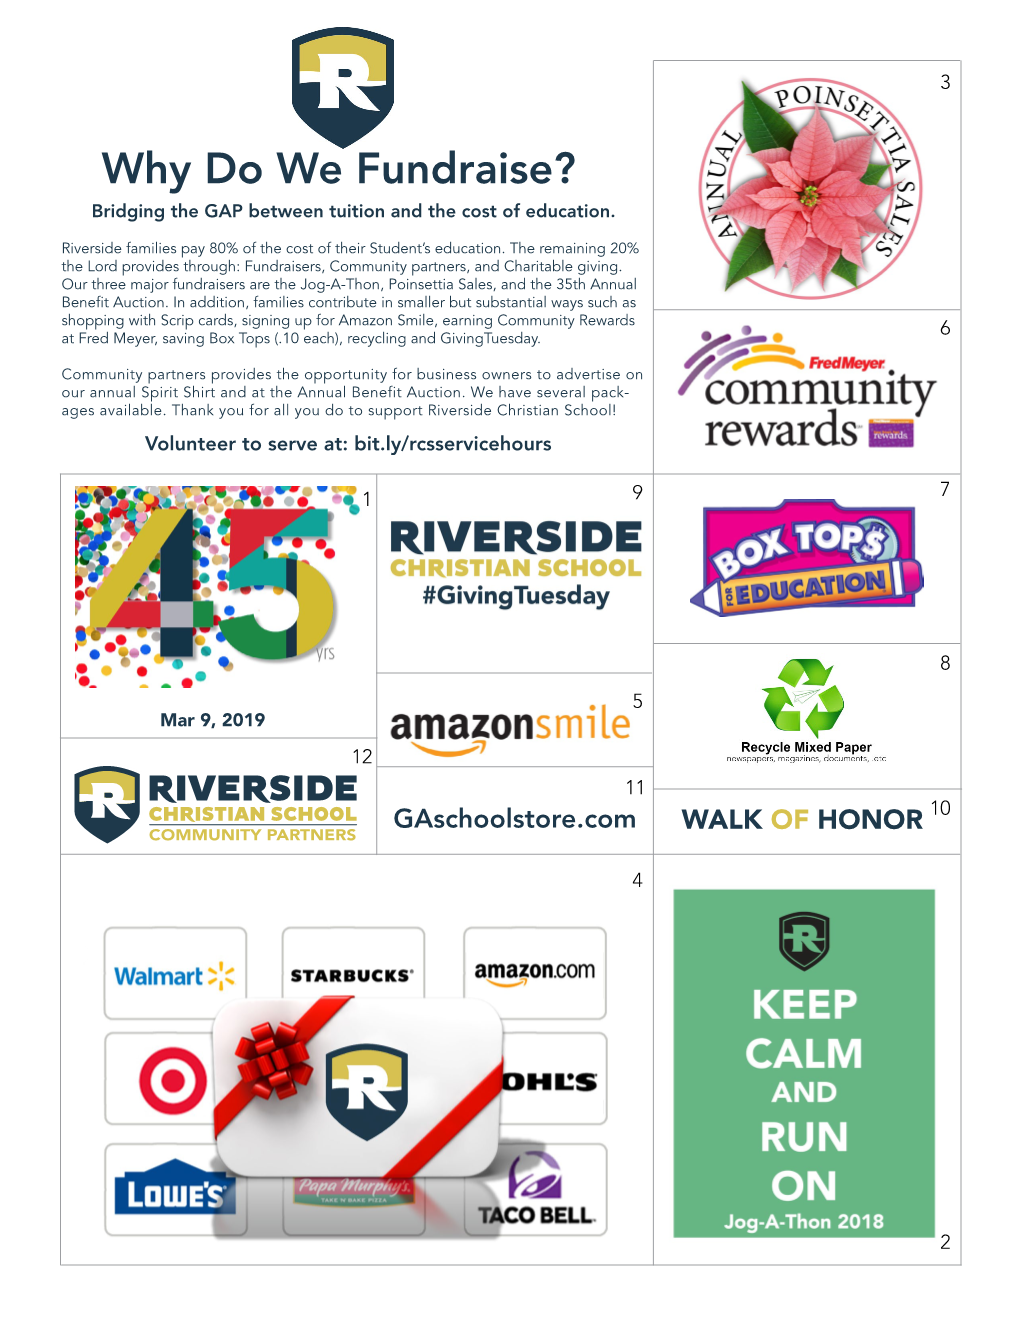 Why We Fundraise?